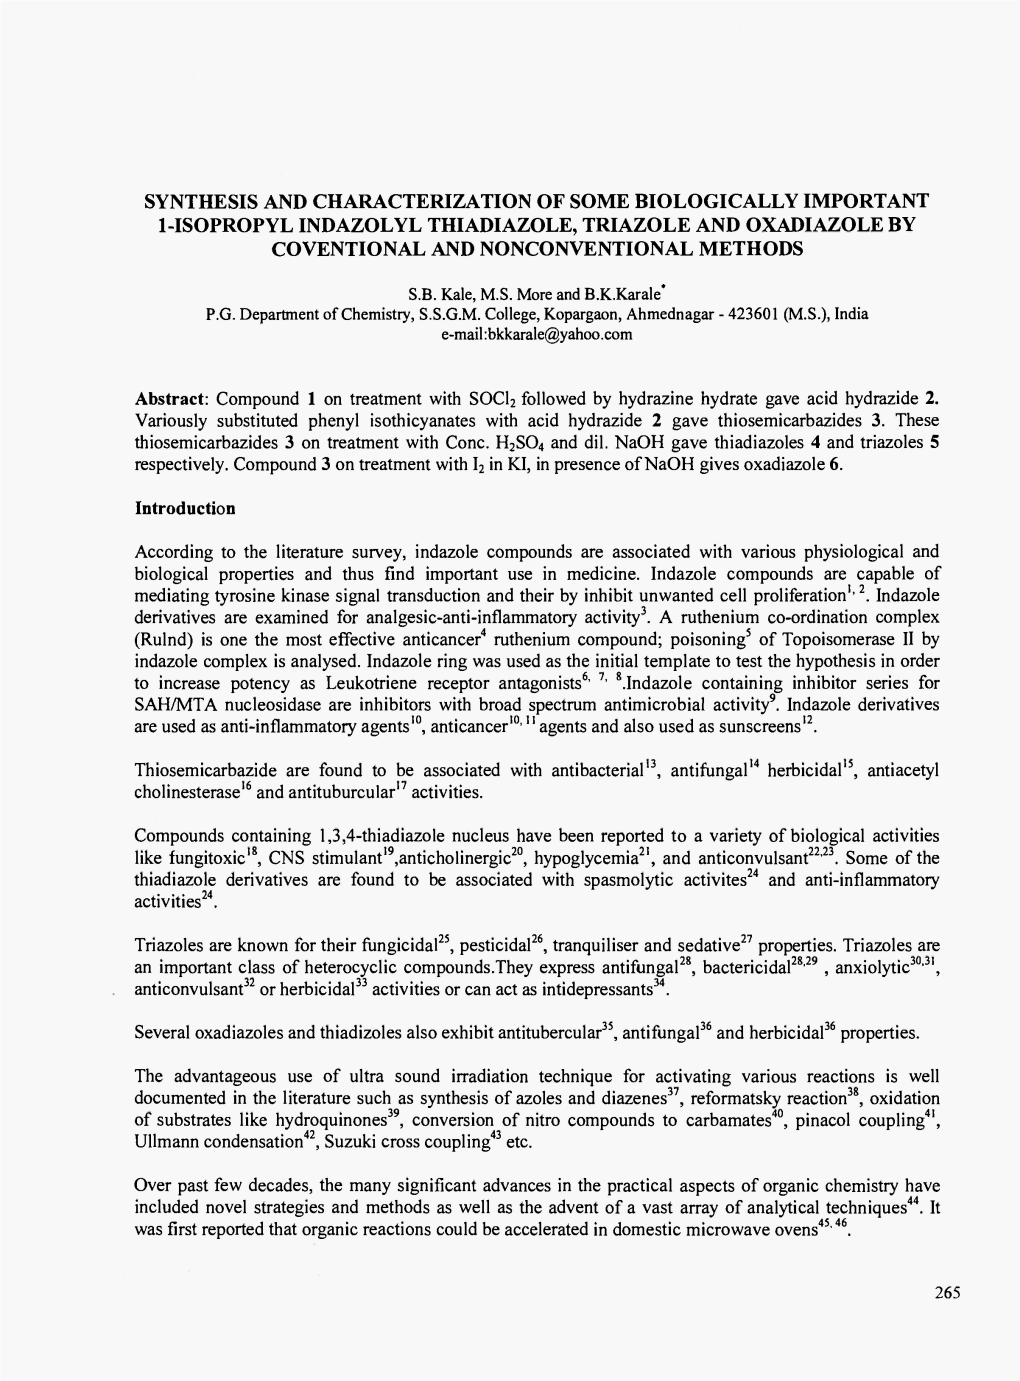 Synthesis and Characterization of Some Biologically Important 1-Isopropyl Indazolyl Thiadiazole, Triazole and Oxadiazole by Coventional and Nonconventional Methods